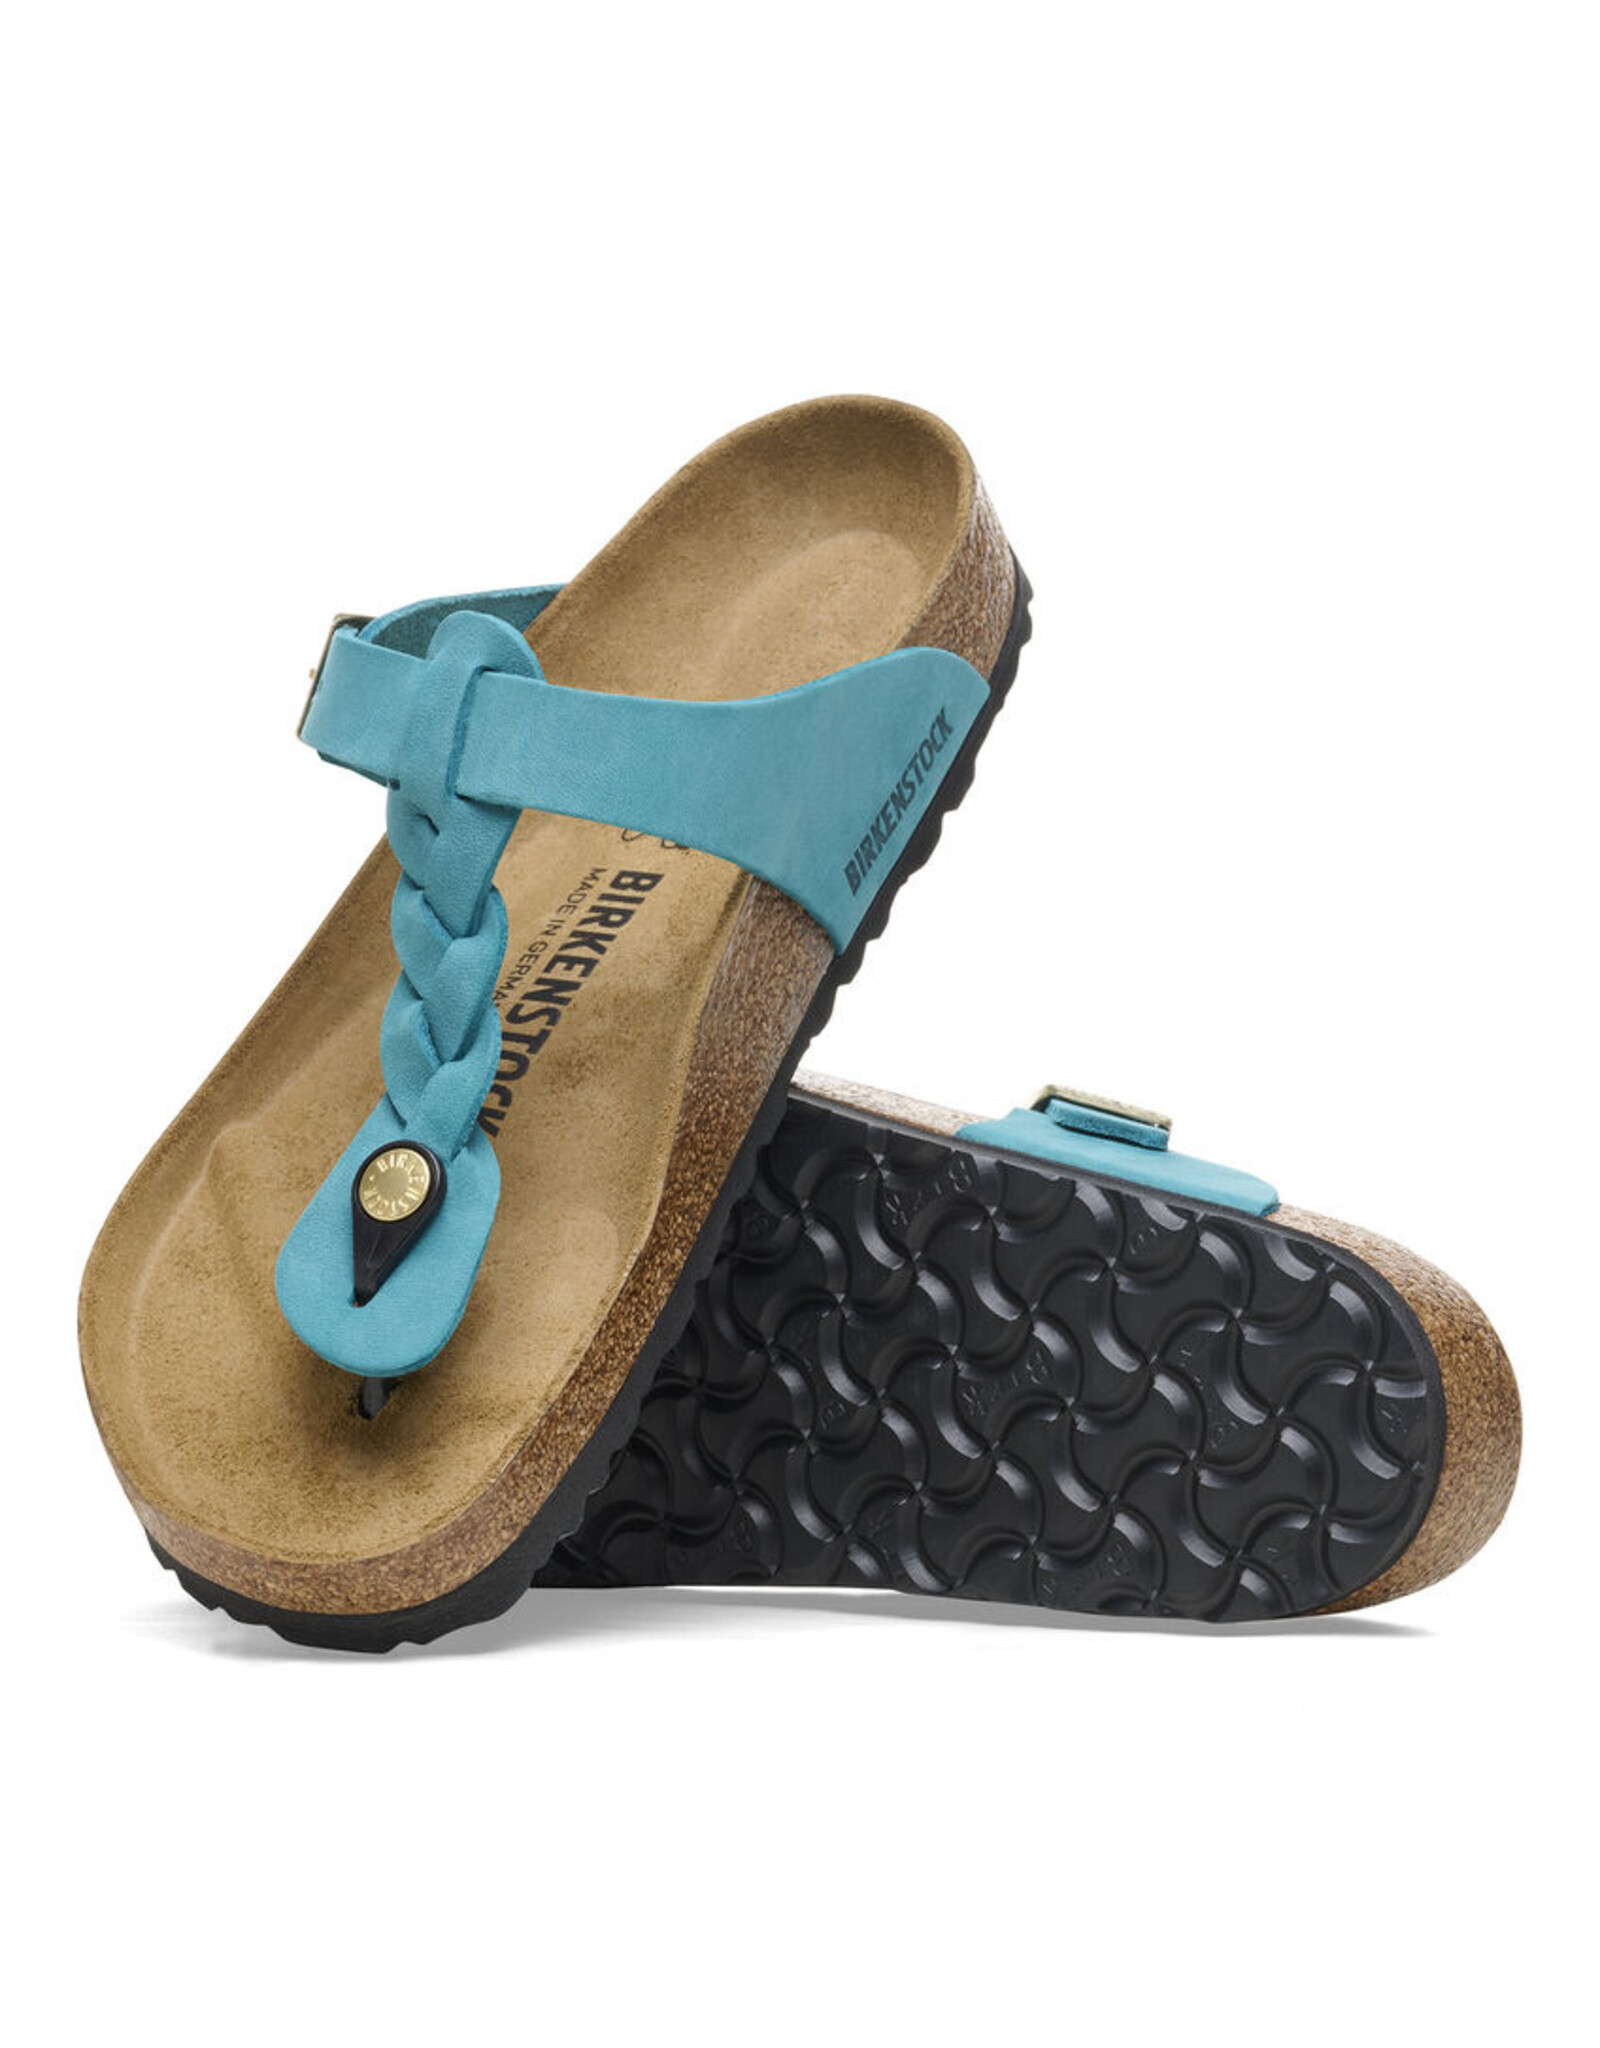 BIRKENSTOCK GIZEH BRAID OILED LEATHER-BISCAY BAY